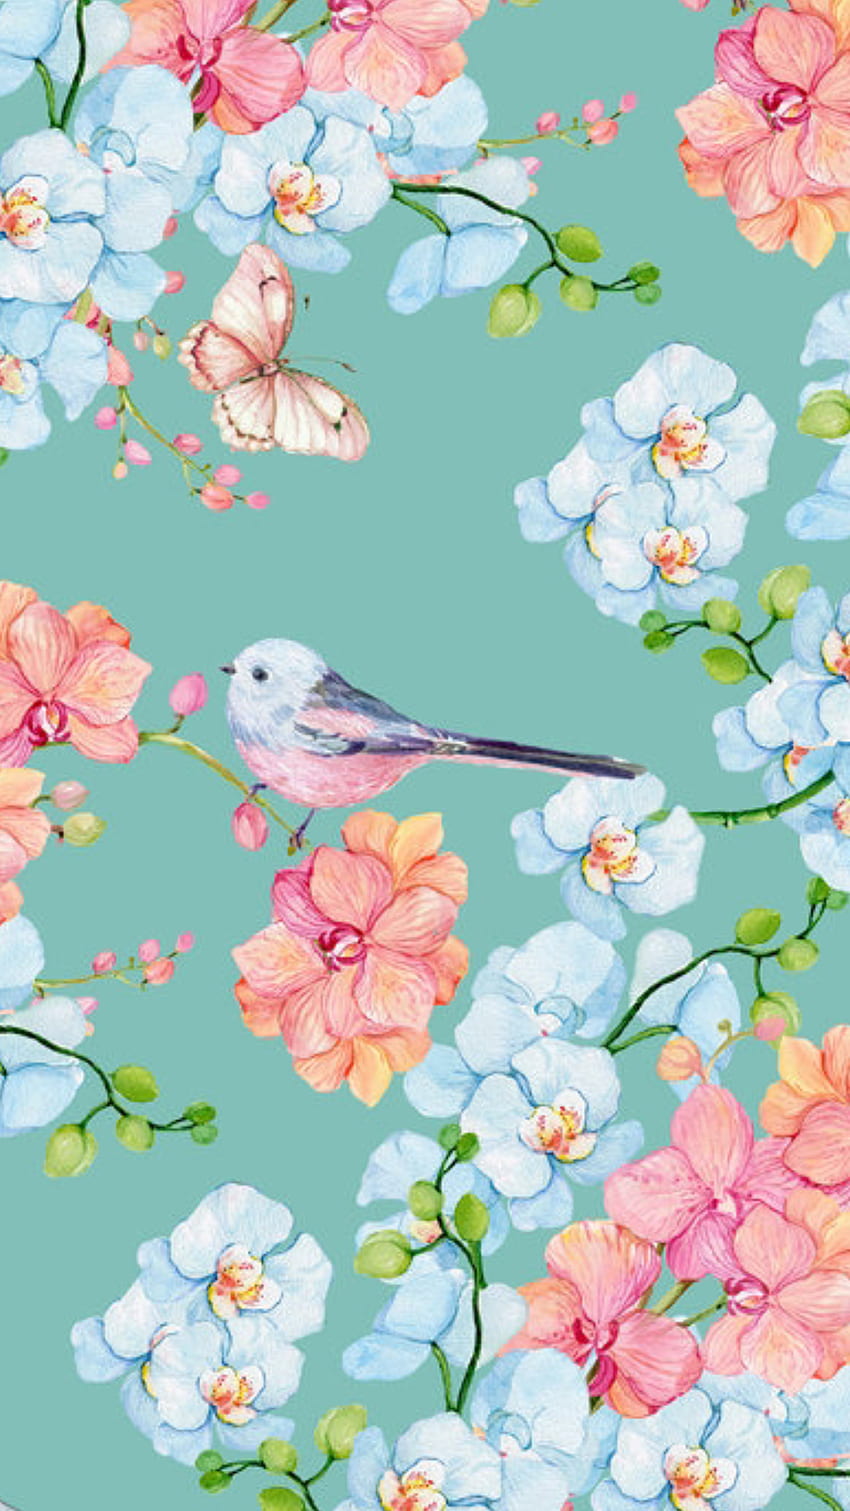 Summer florals with bird and butterfly watercolor illustrations. HD phone wallpaper